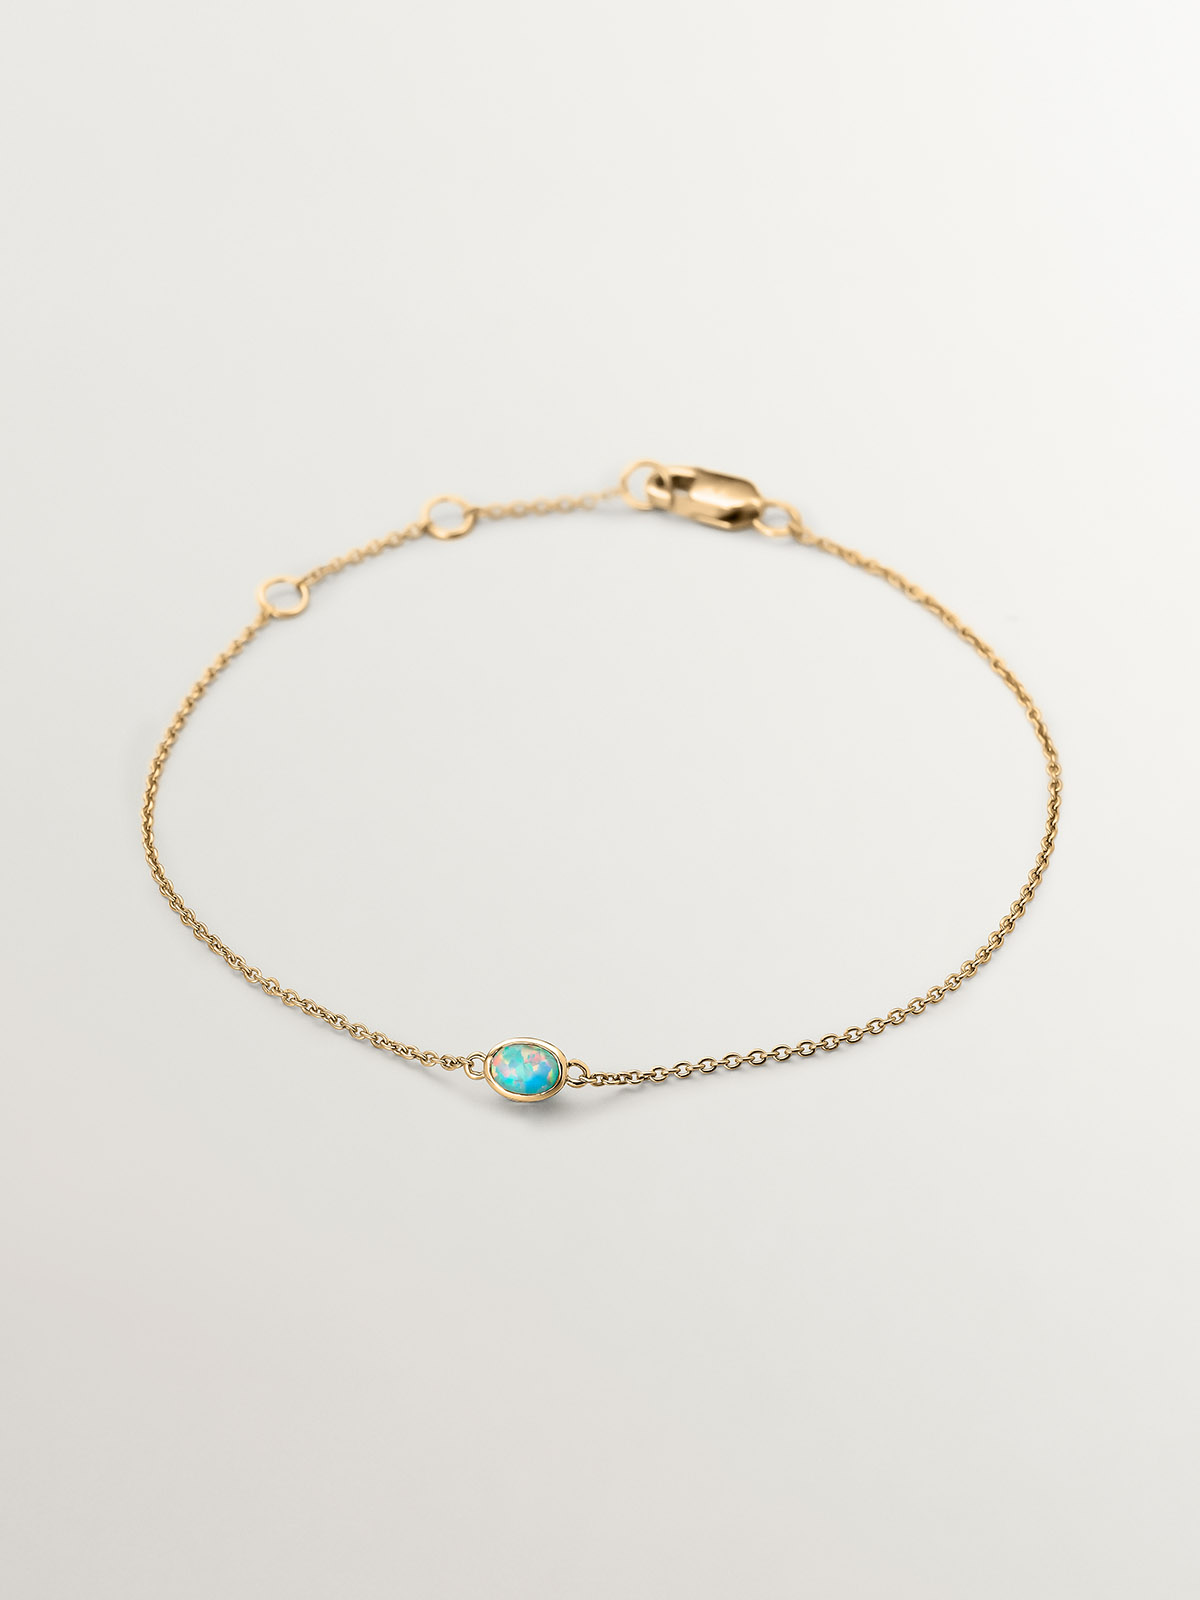 18K yellow gold bracelet with turquoise opals and diamonds.